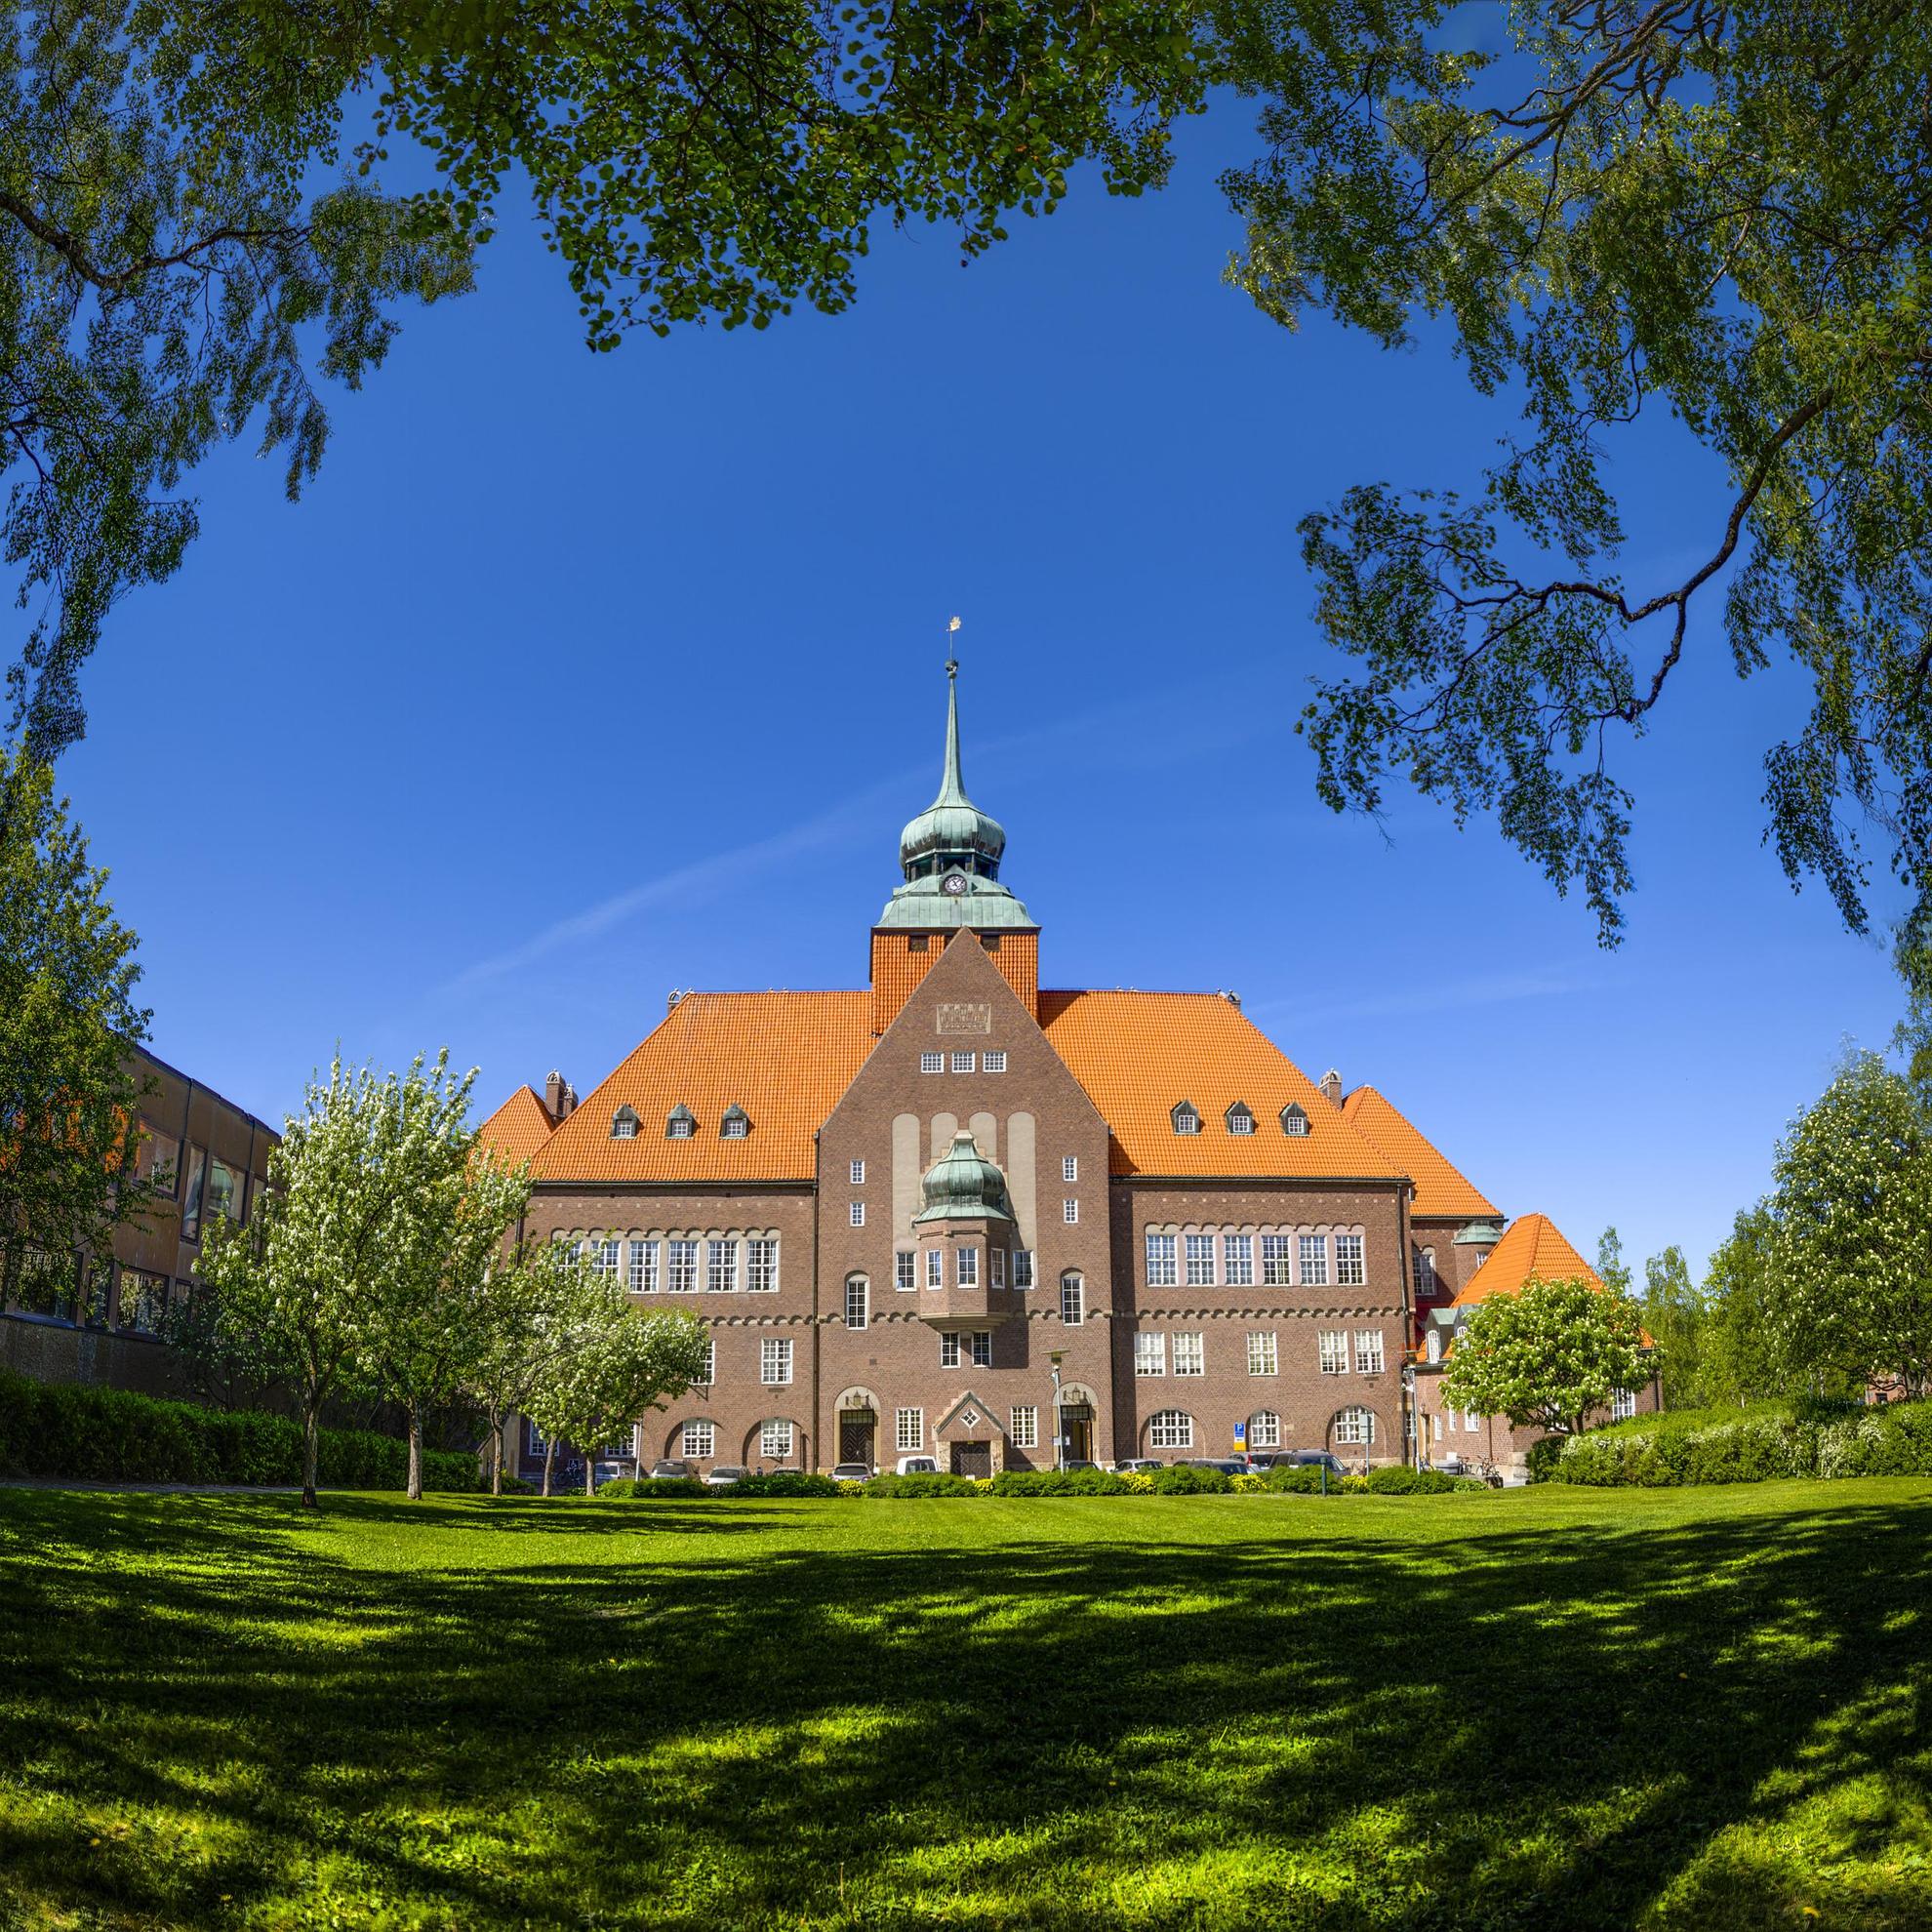 The backside of Town Hall in Östersund. A large brick building with a large tower in the middle. A green lawn, bushes and some trees in front of the building. Branches from a tree at the top of the picture.